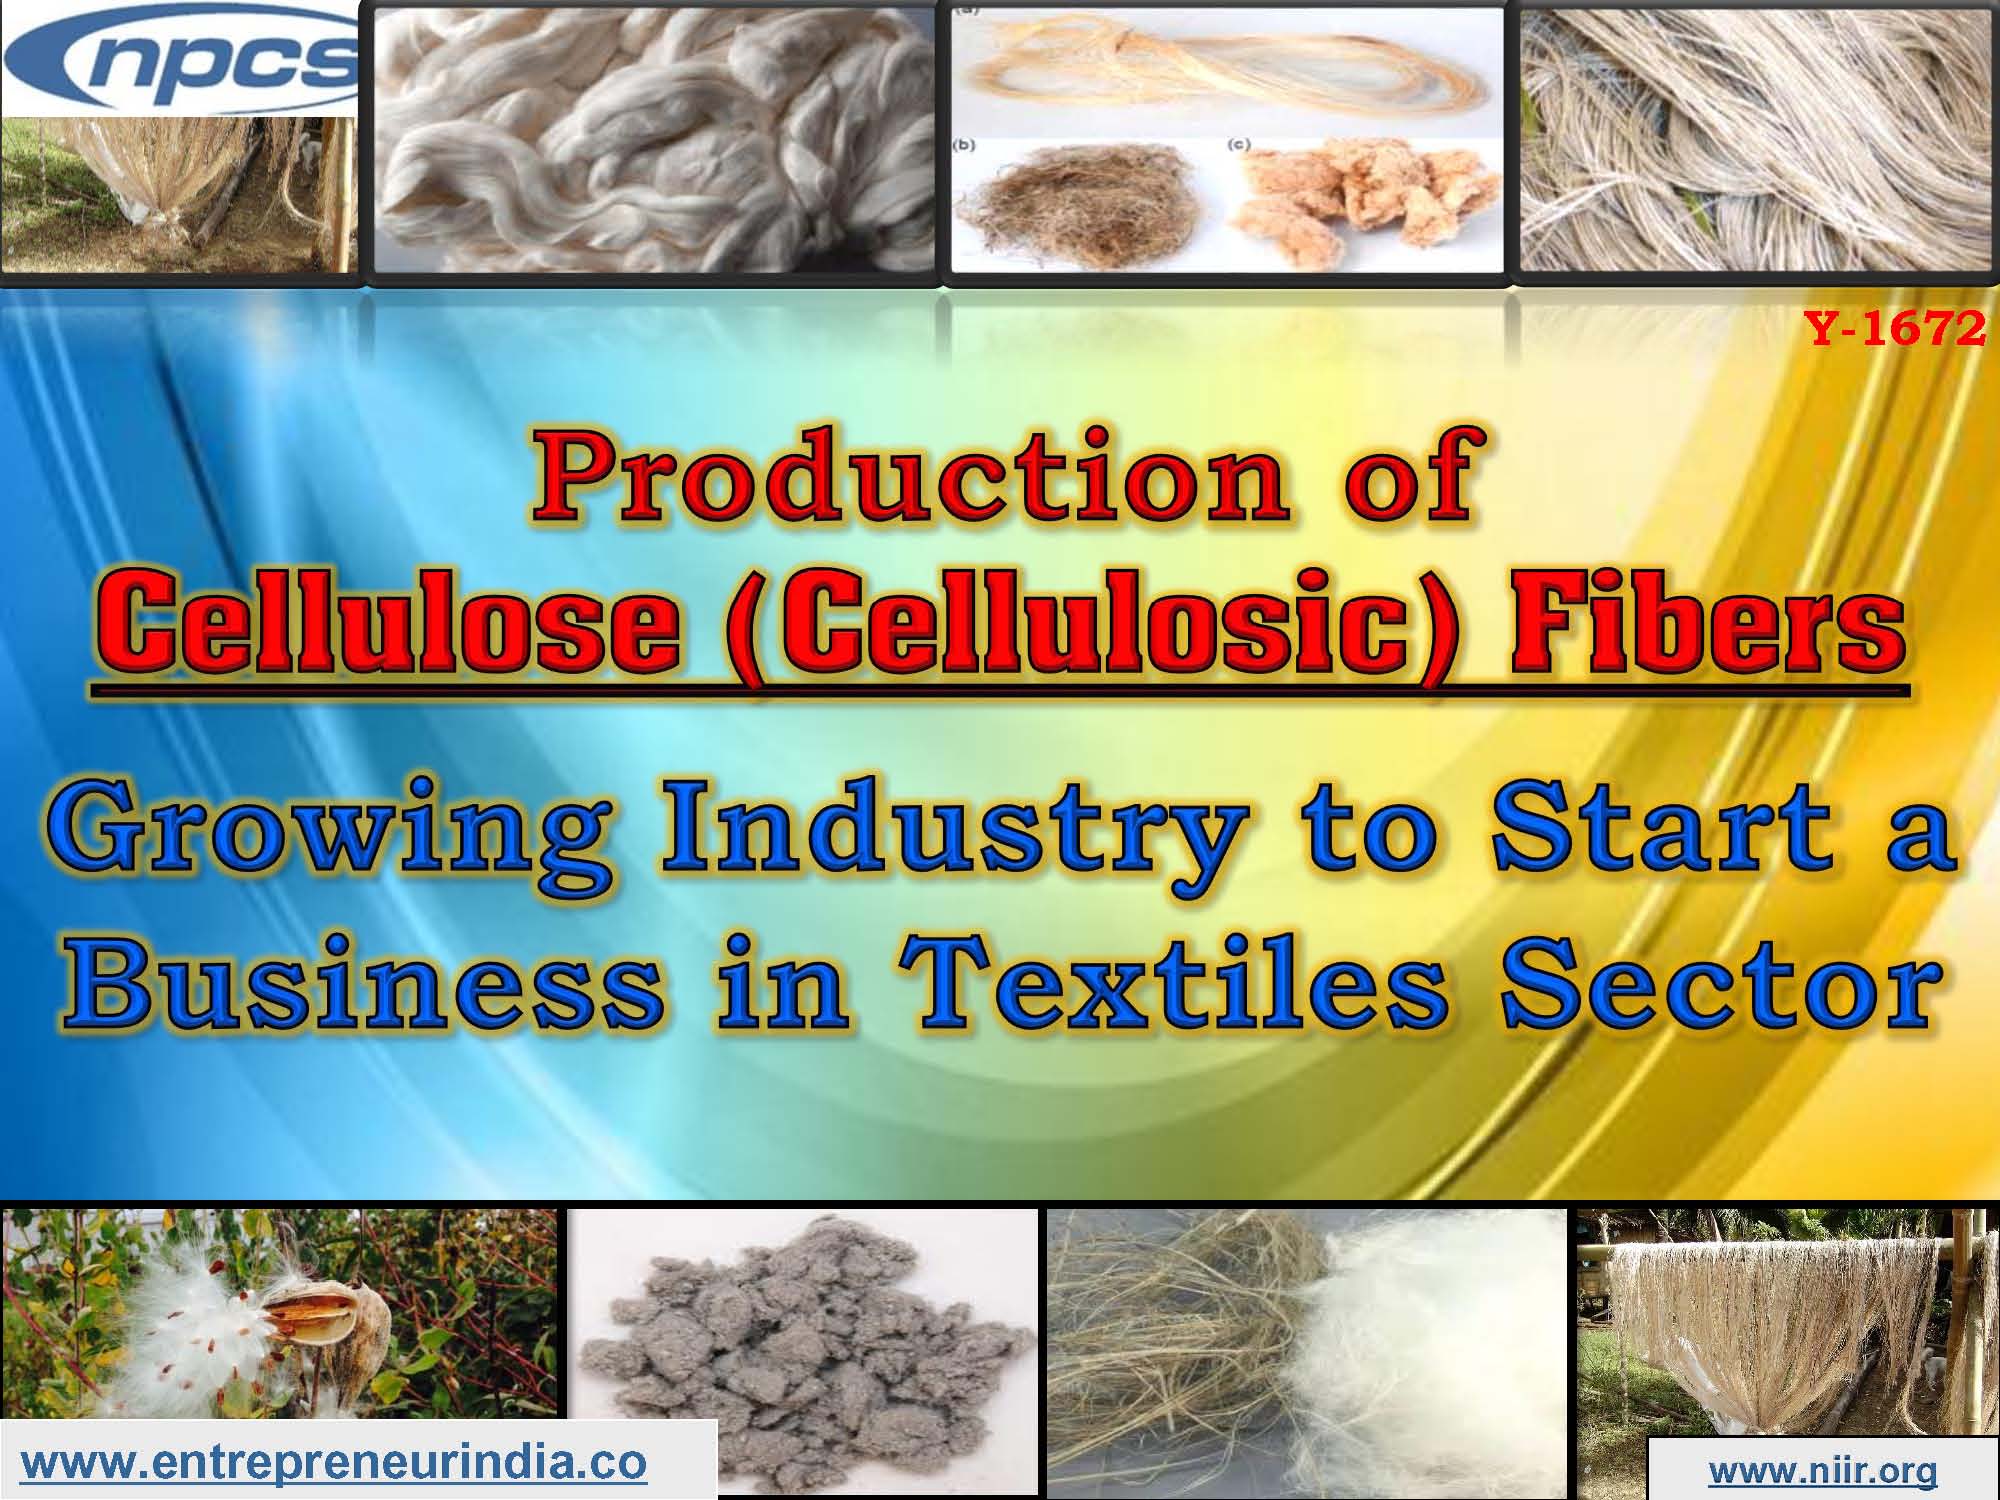 Production of Cellulose (Cellulosic) Fibers